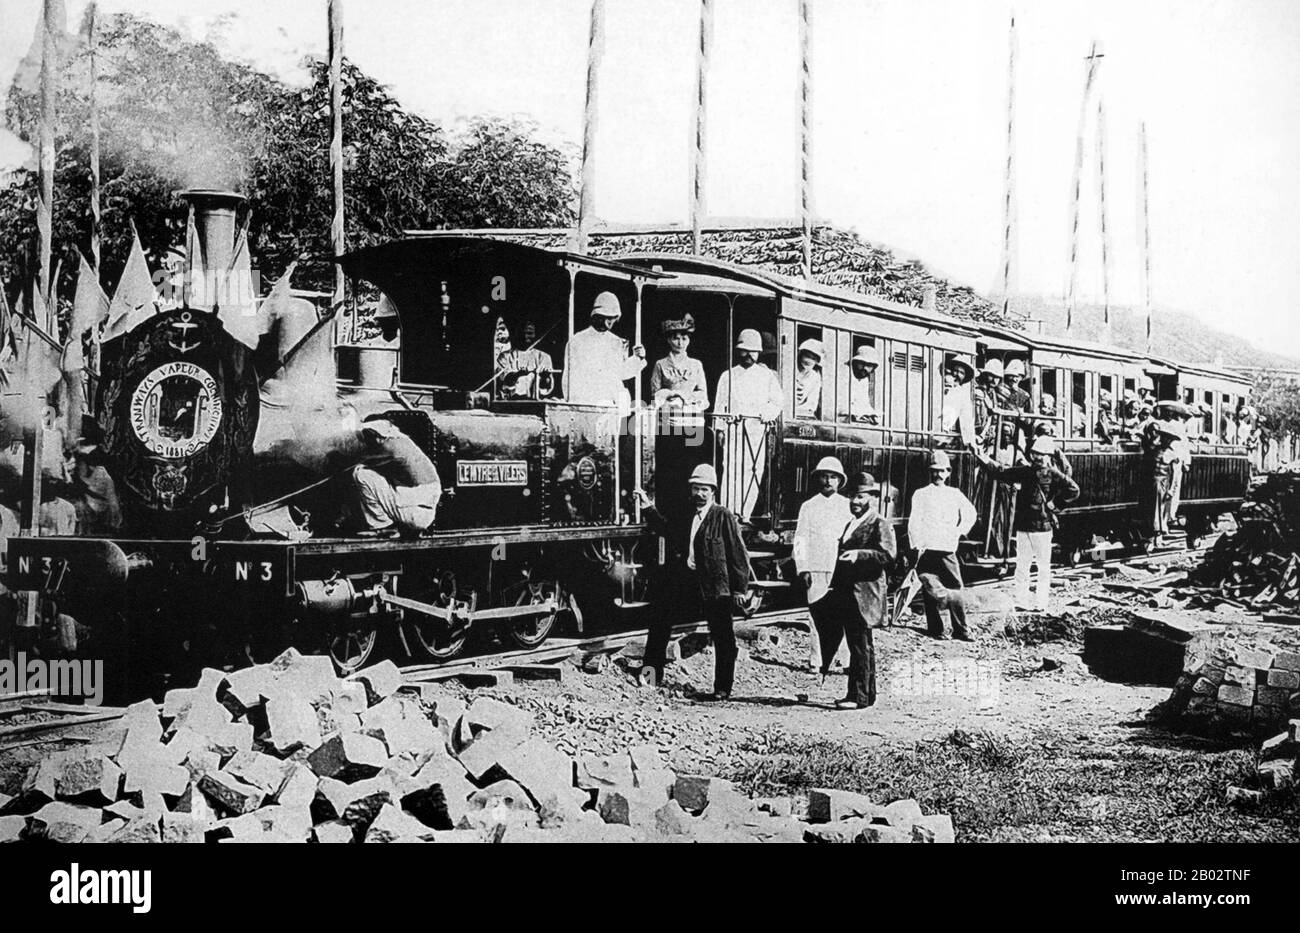 The first railways in Vietnam were established in the 1880s; these included a tram running between the ports of Saigon and Cholon, and a regional rail line connecting Saigon with Mỹ Tho in the Mekong Delta. Railway construction flourished soon afterwards, during the administration of Paul Doumer as Governor-General of French Indochina from 1897 to 1902. Stock Photo